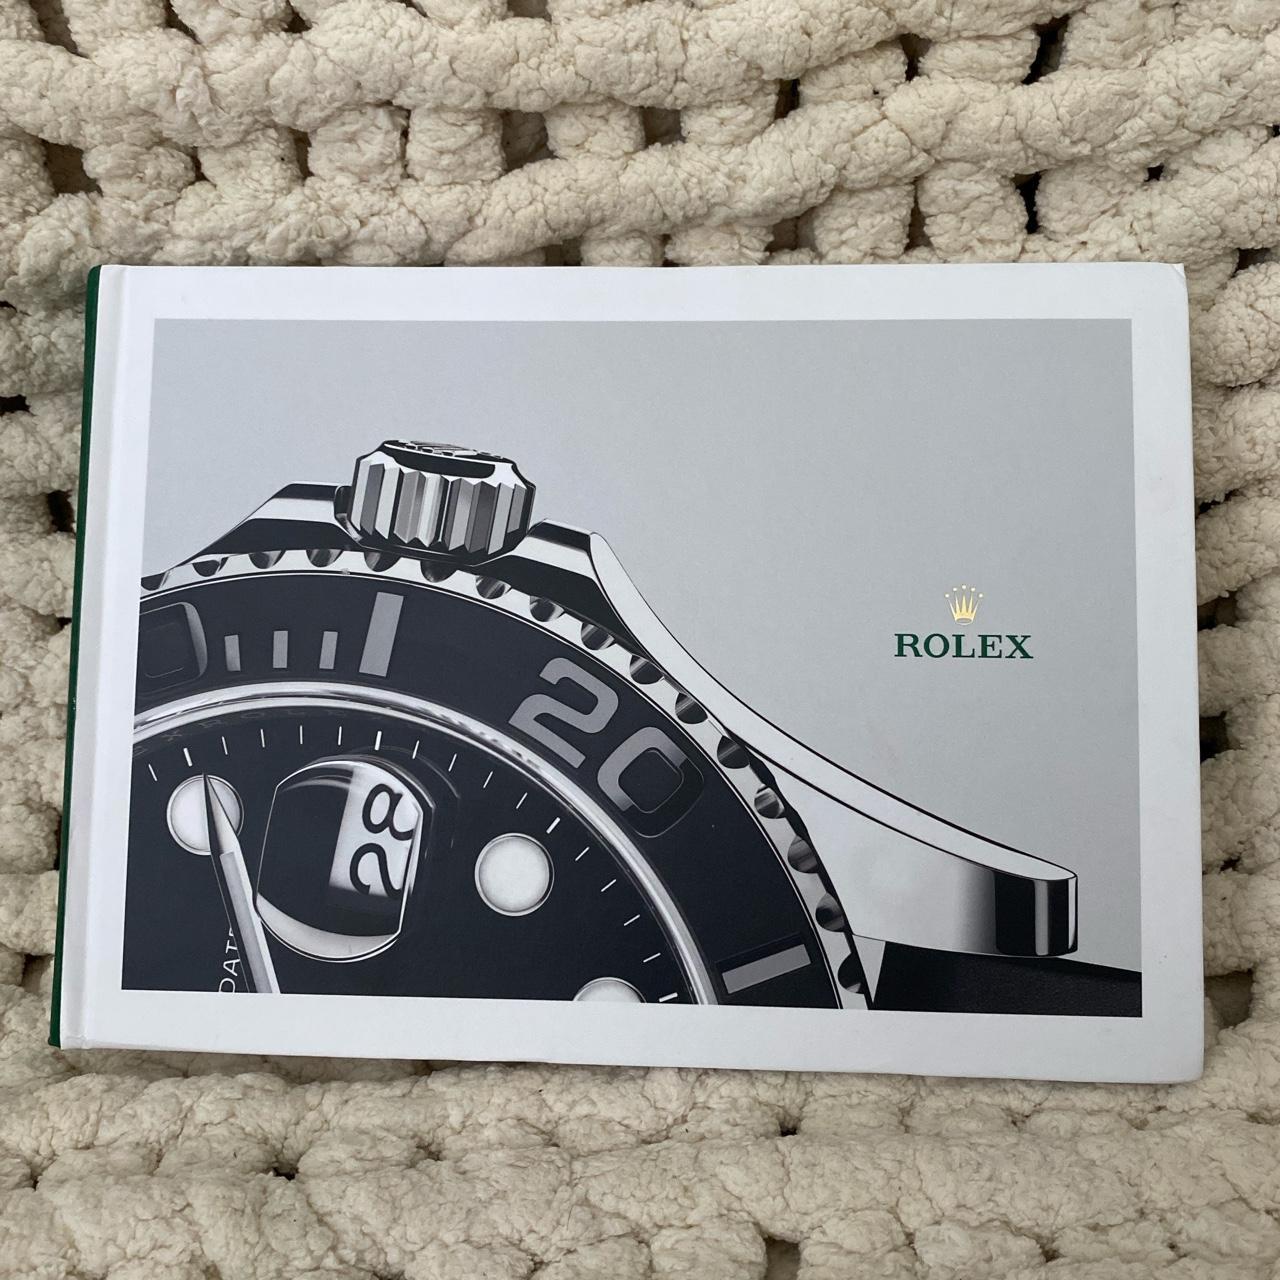 Product Image 1 - Rolex watch coffee table book